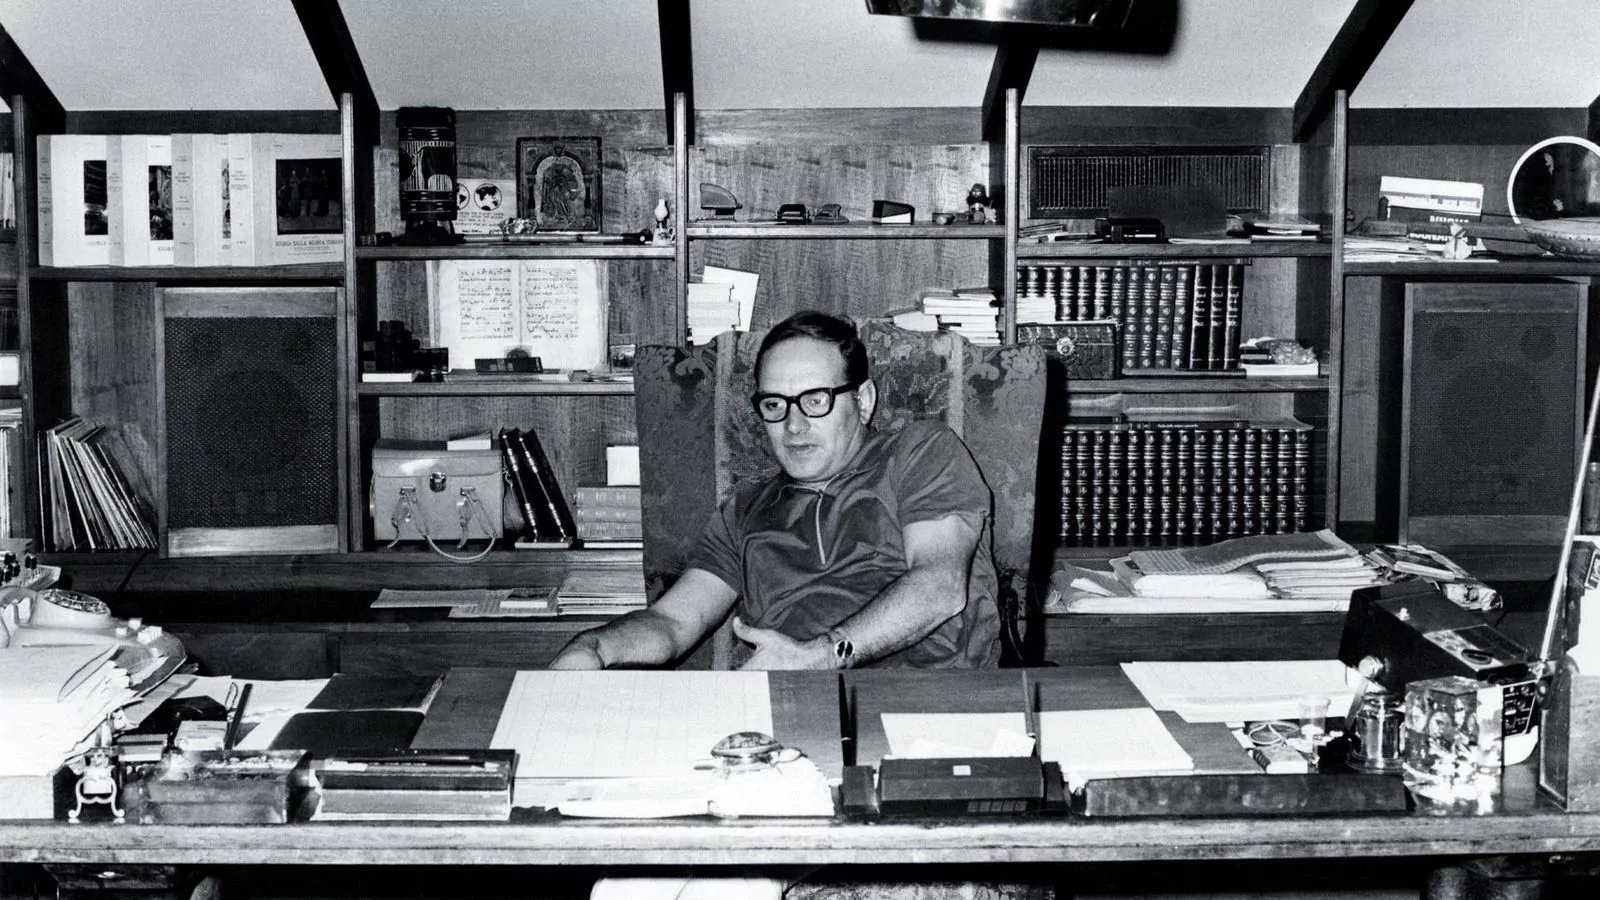 Ennio Morricone in his youth